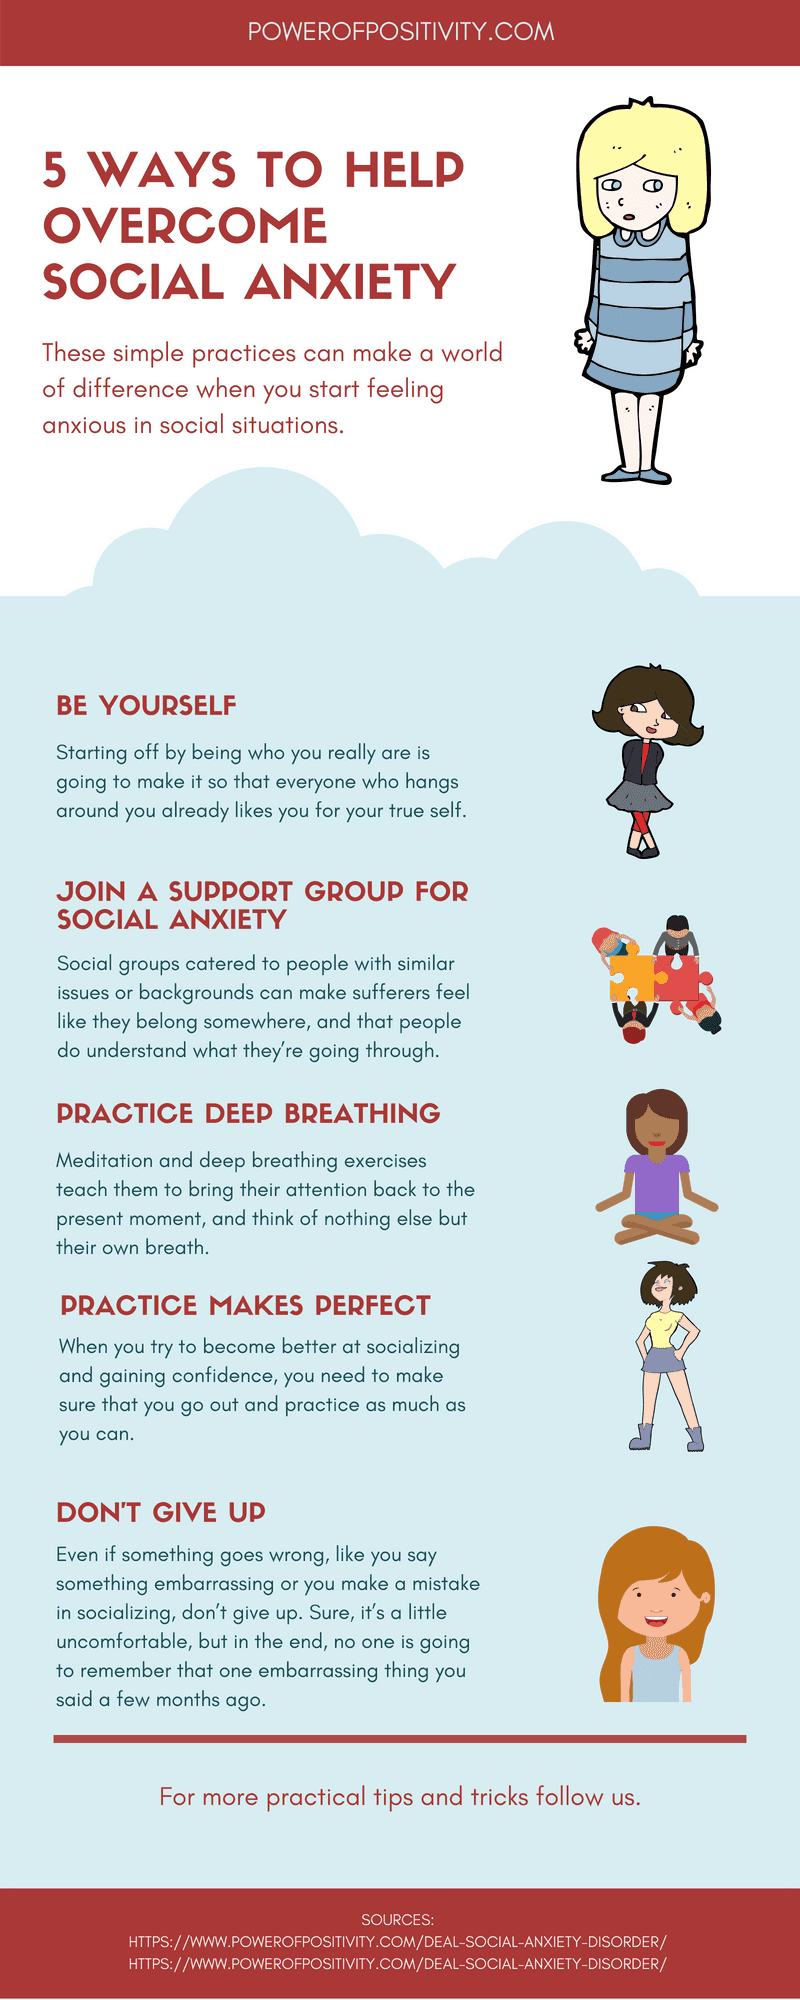 Ways to help overcome social anxiety infographic